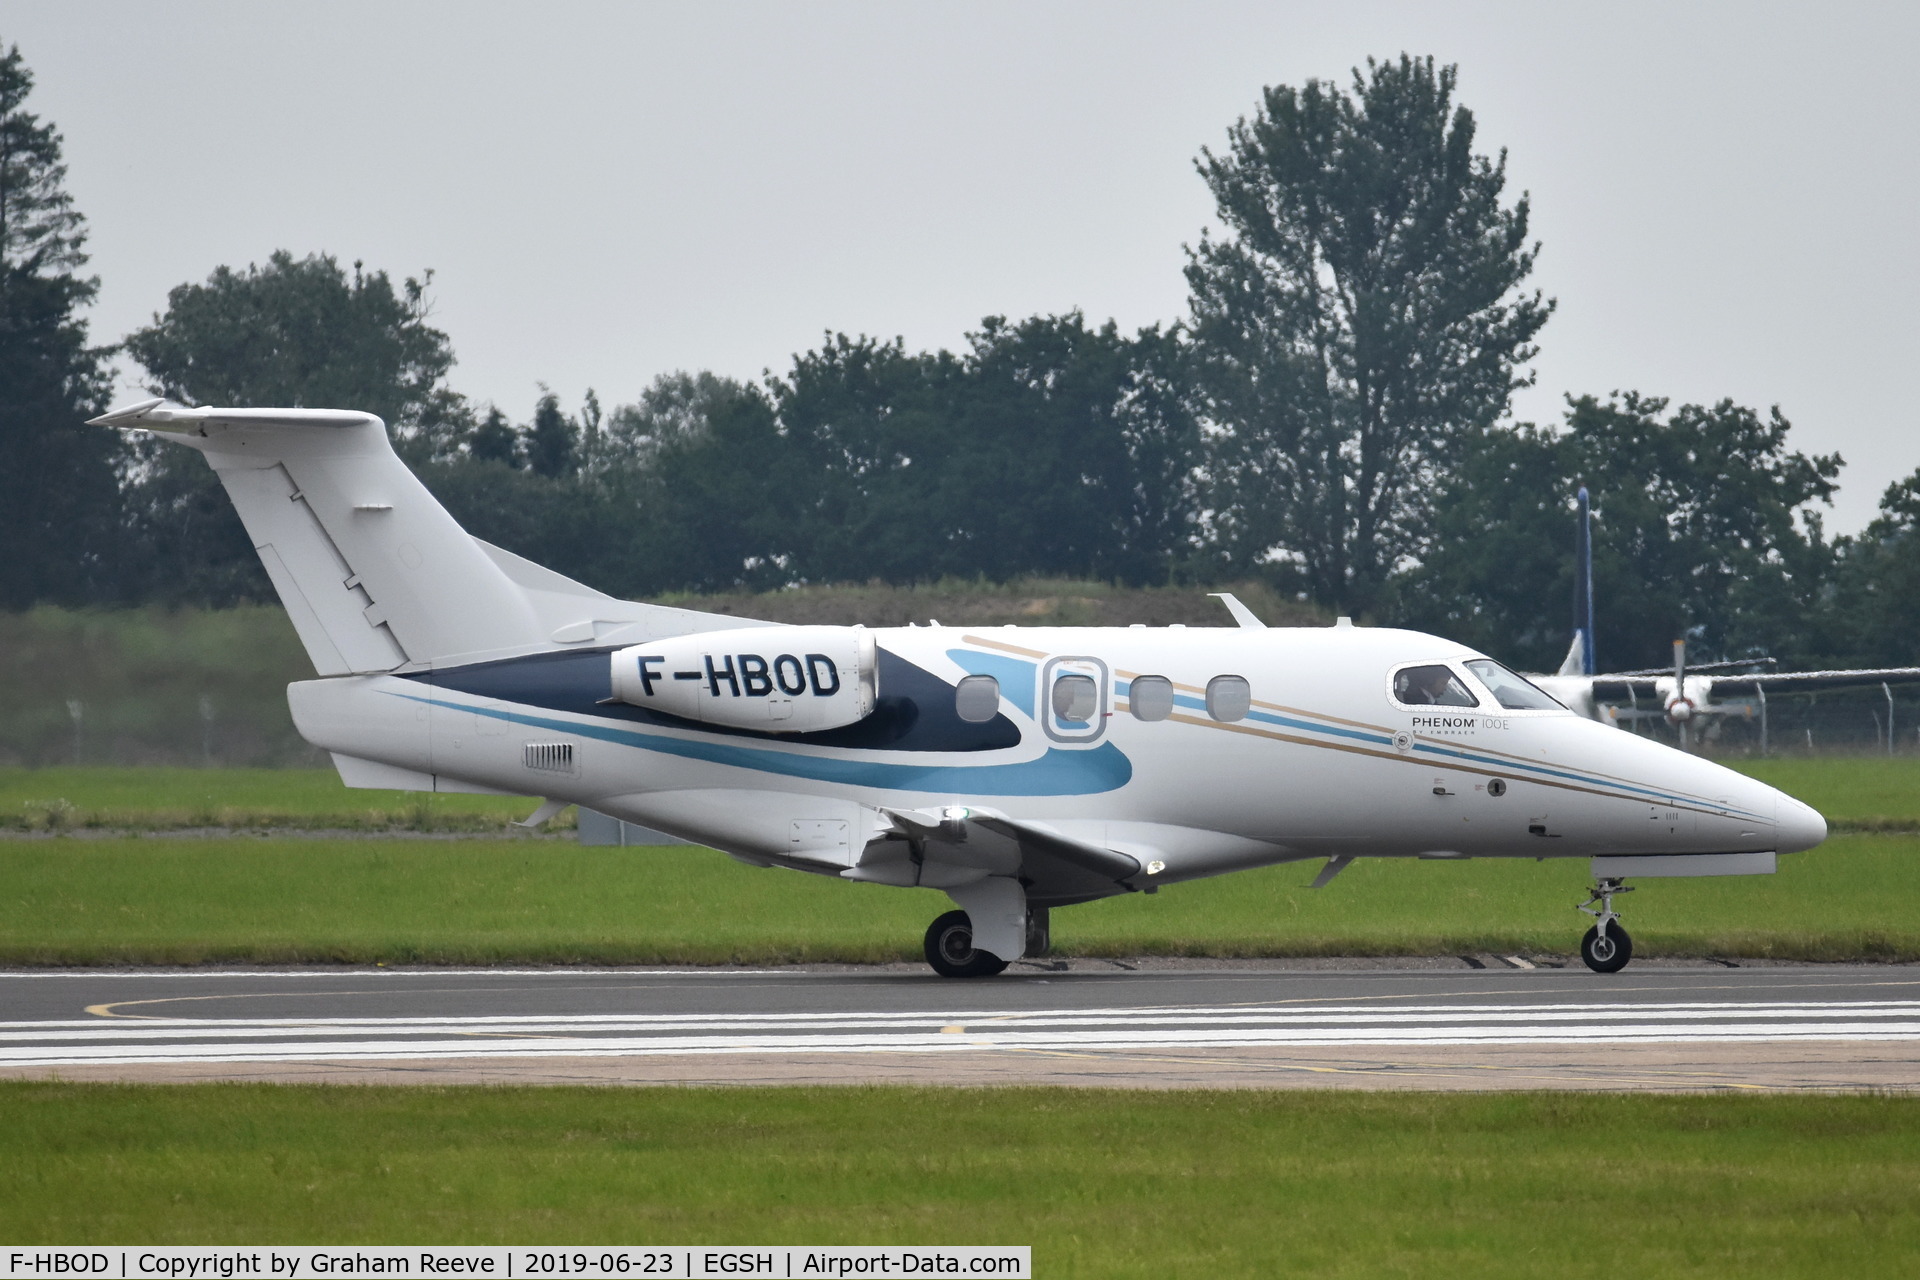 F-HBOD, 2017 Embraer EMB-500 Phenom 100 C/N 50000366, Departing from Norwich.